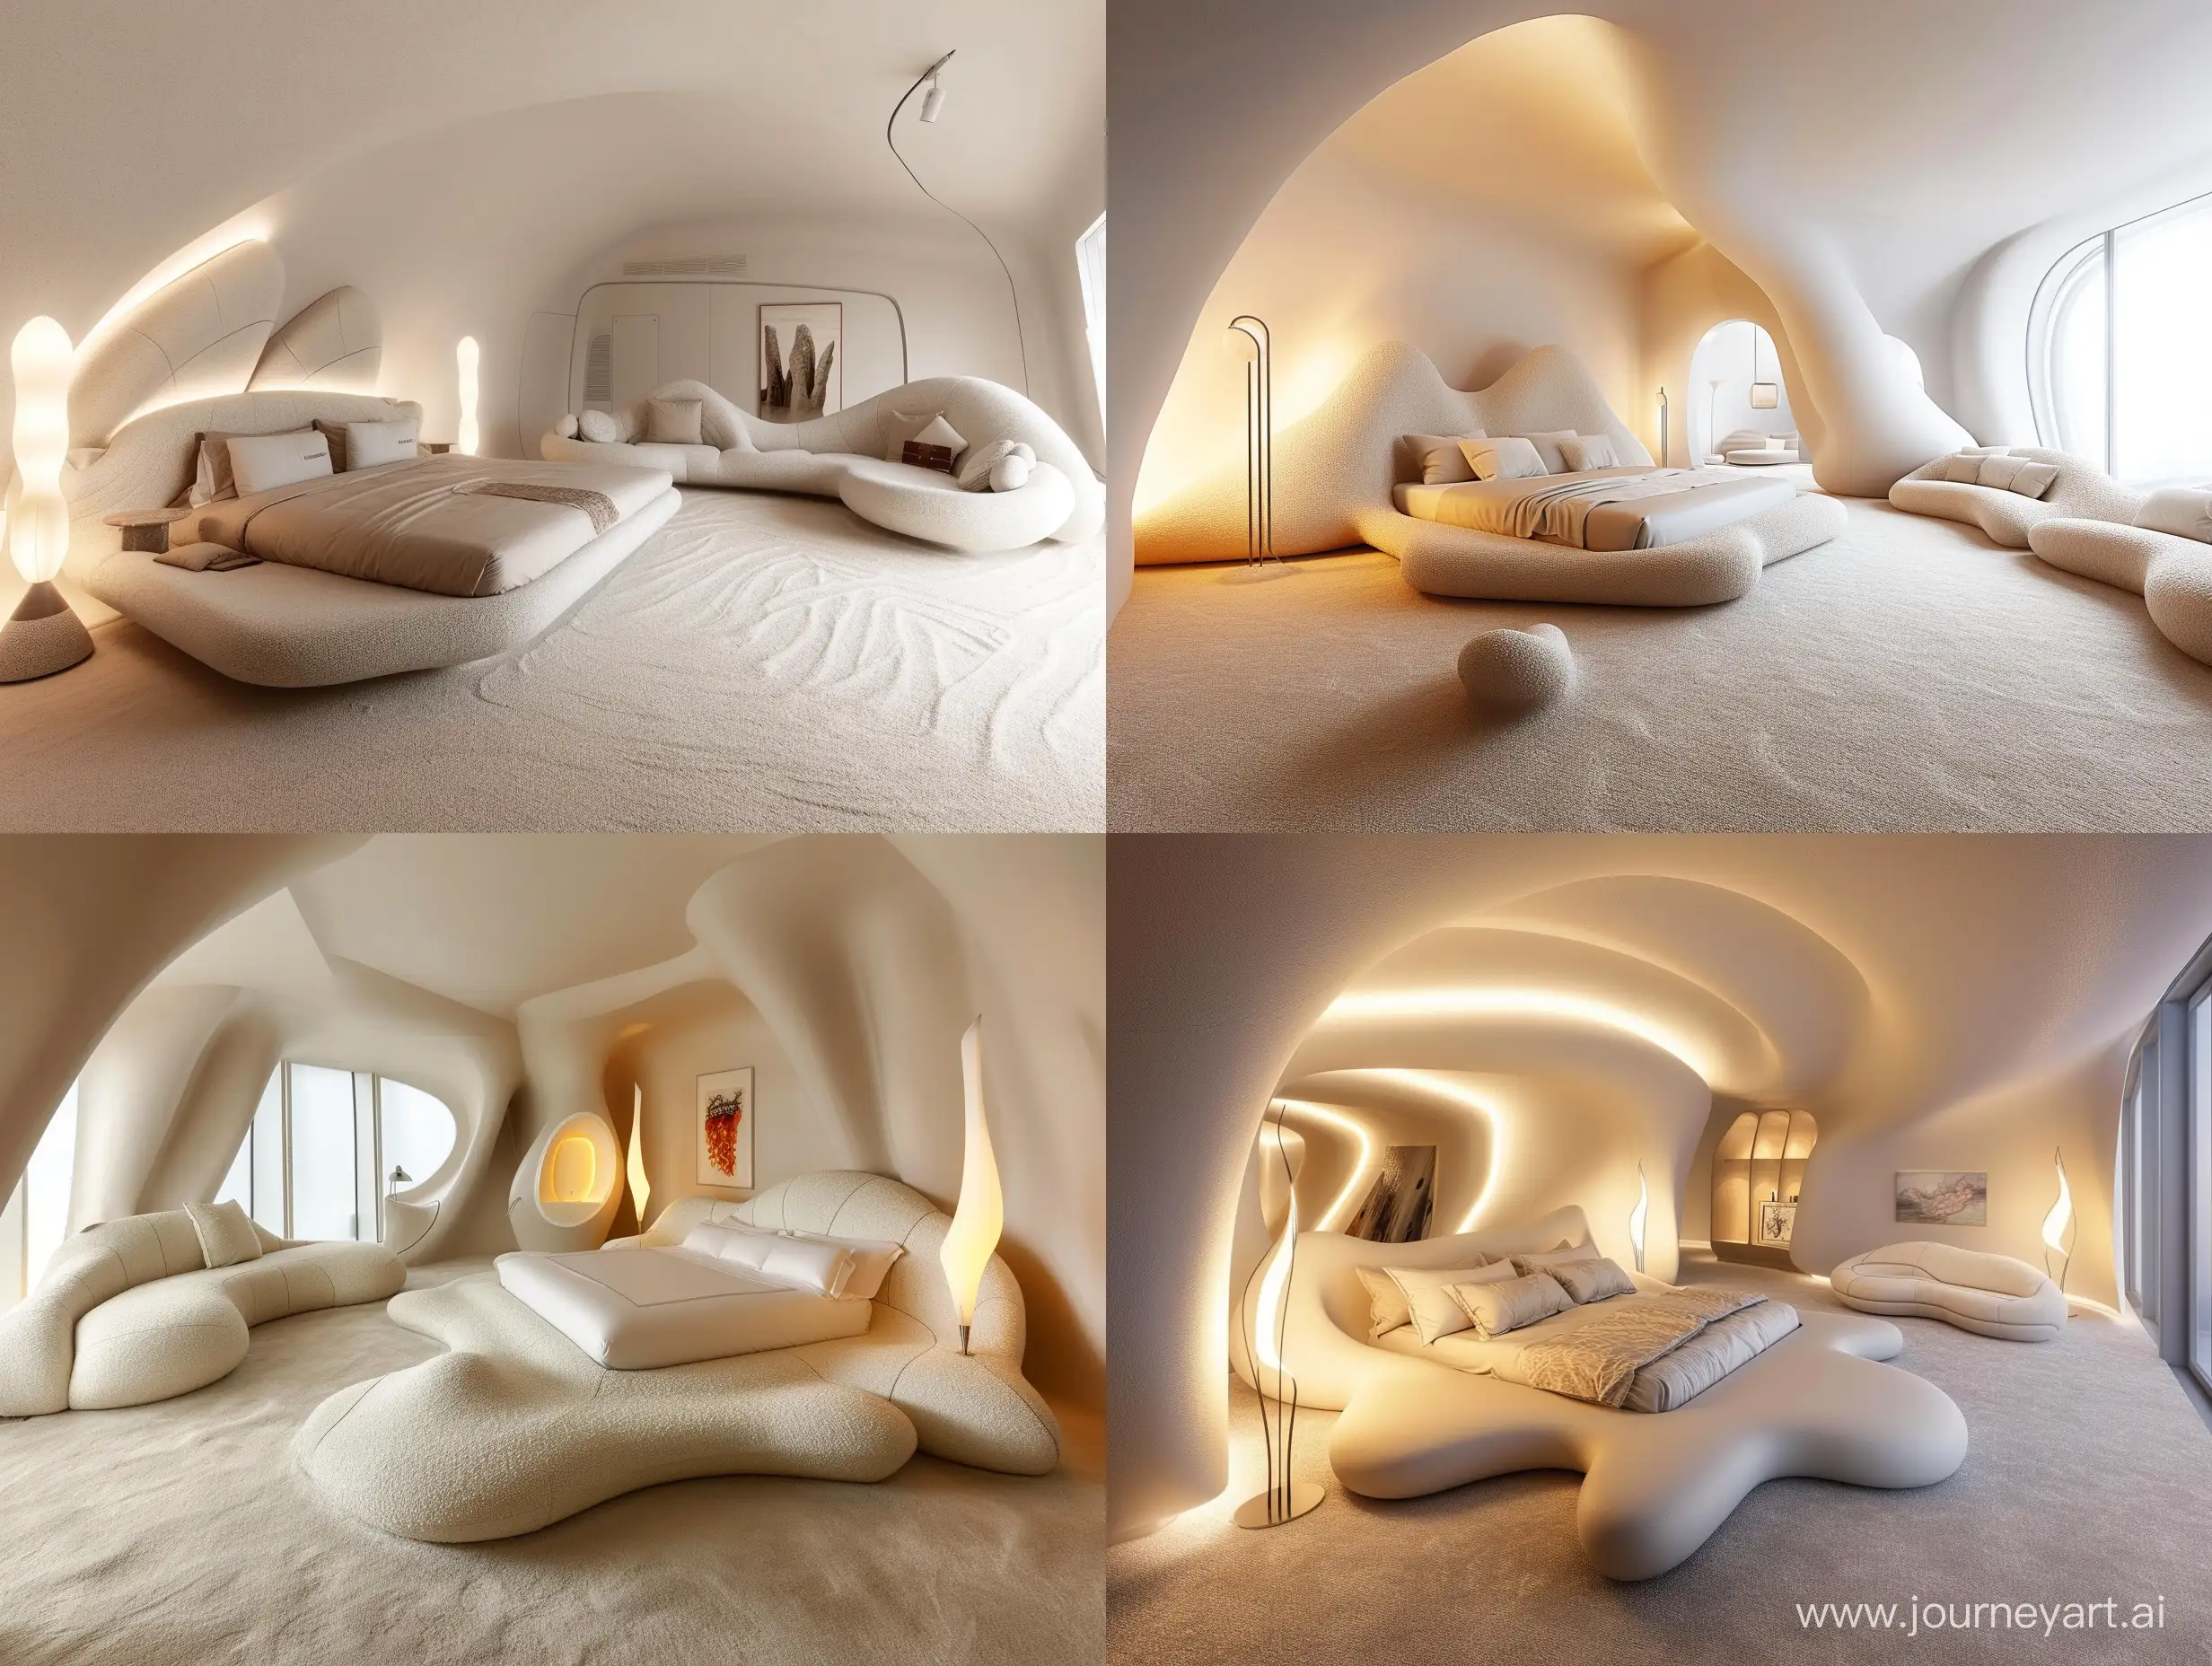 A 10 meter x 20 meter bedroom with an interior space designed in the style of Zaha Hadid, equipped with a similarly shaped king bed, carpeted floor,
floor lamps, and a comfortable set of shaped sofas.Smooth irregular curves are the main constituent elements.warm and comfortable. with white as the main tone in the space